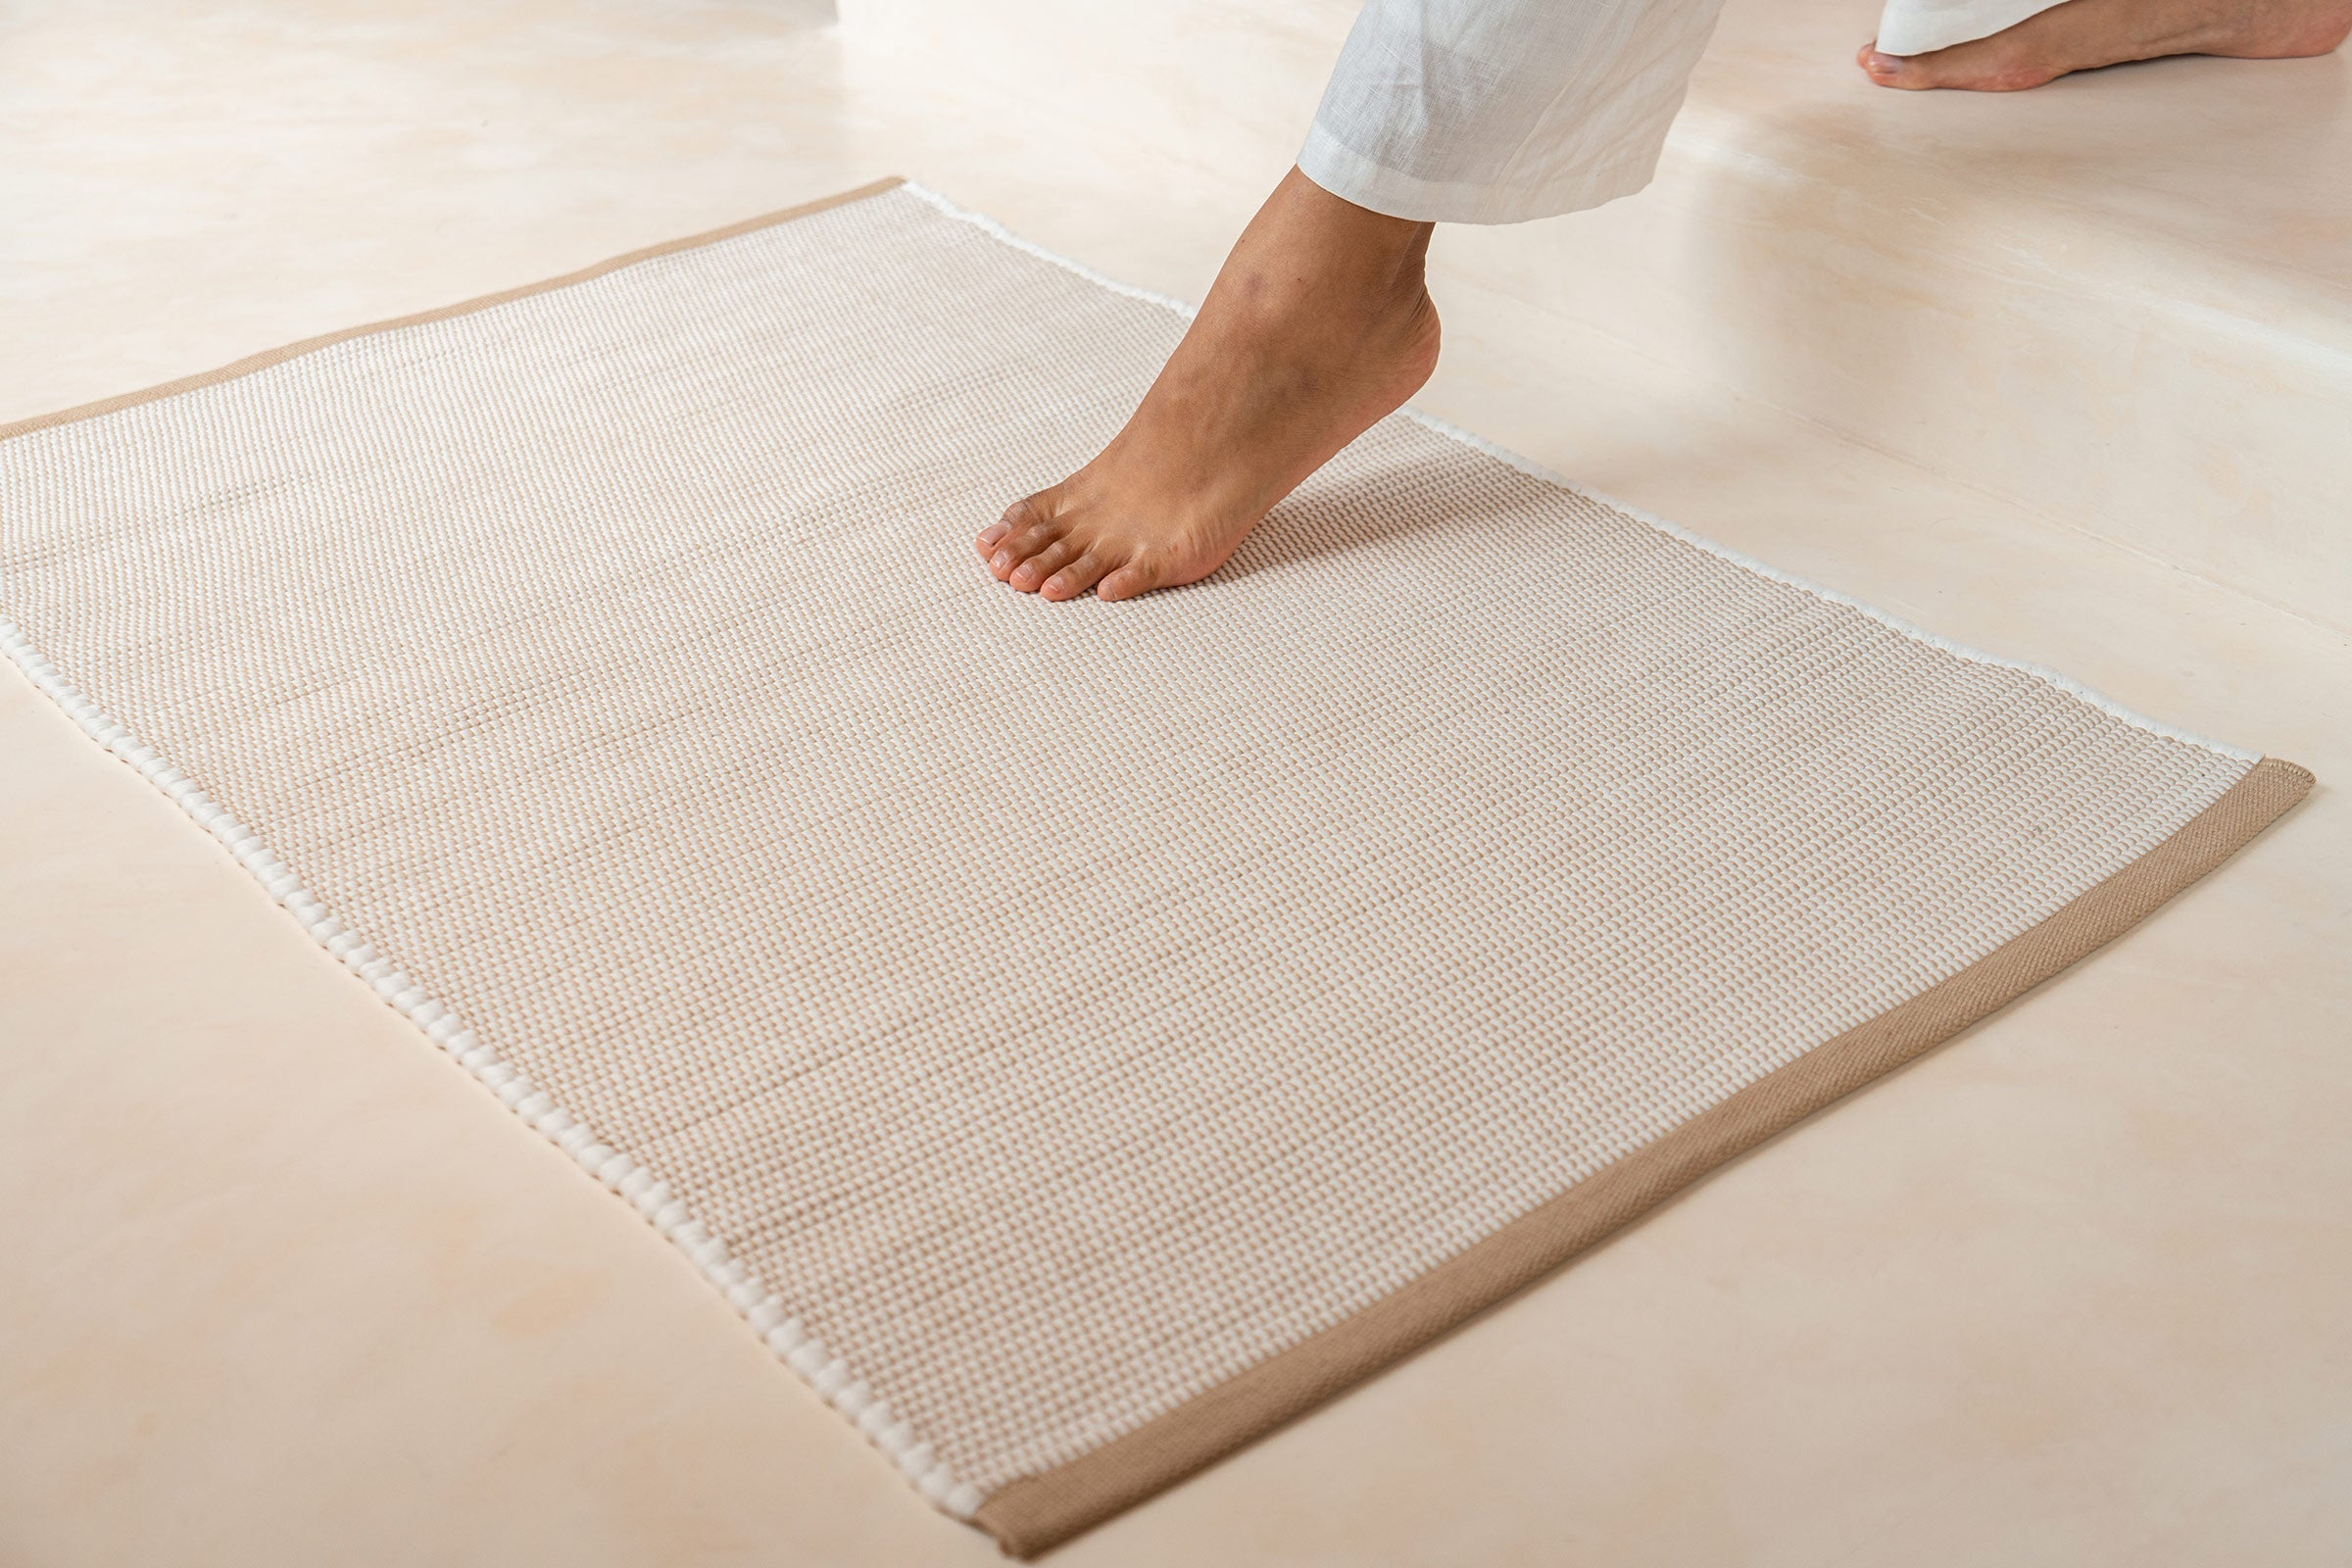 large-white-cotton-floor-mats-by-sojao.jpg